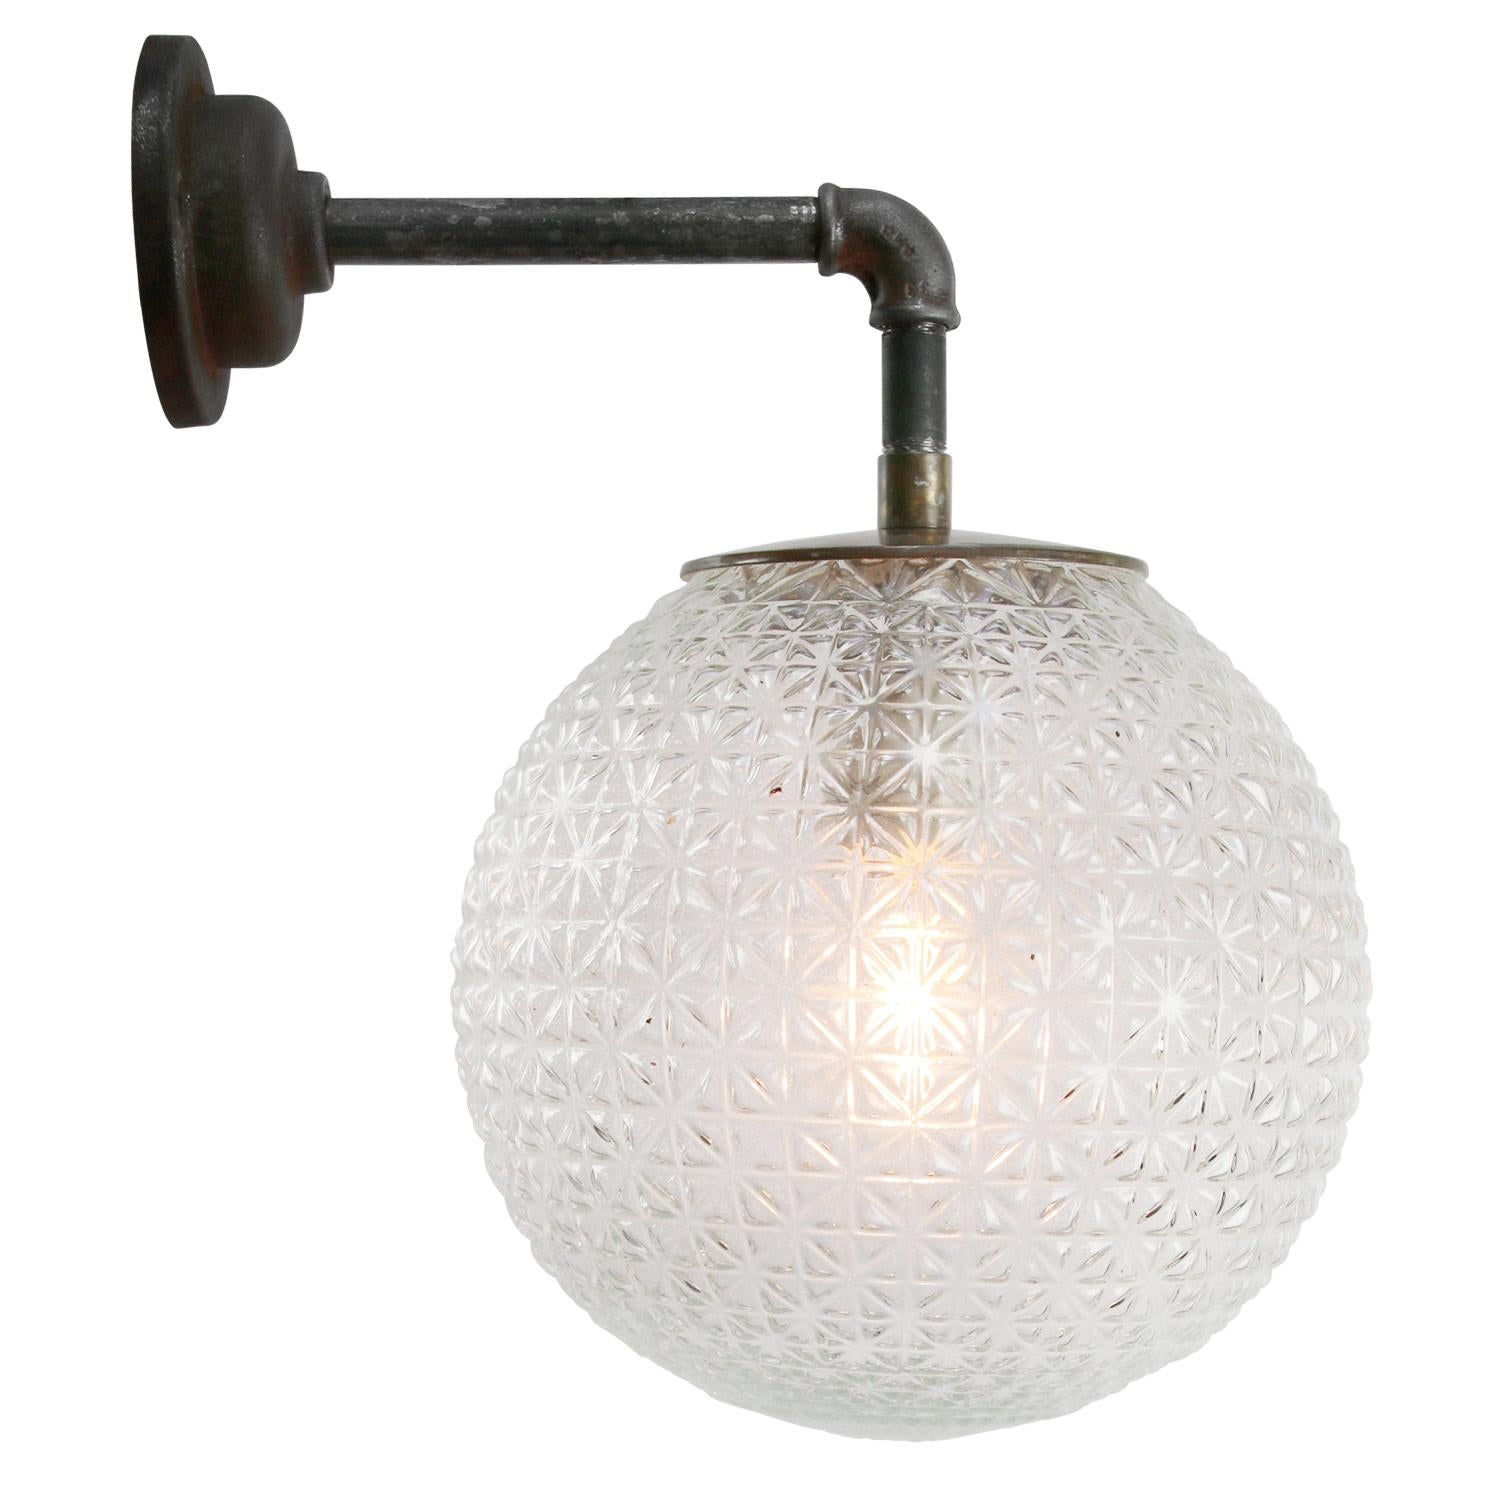 Brass and cast iron industrial wall light
Clear texture glass globe

Diameter cast iron wall piece: 10.5 cm / 4” cm, 2 holes to secure

Weight: 4.80 kg / 10.6 lb

Priced per individual item. All lamps have been made suitable by international